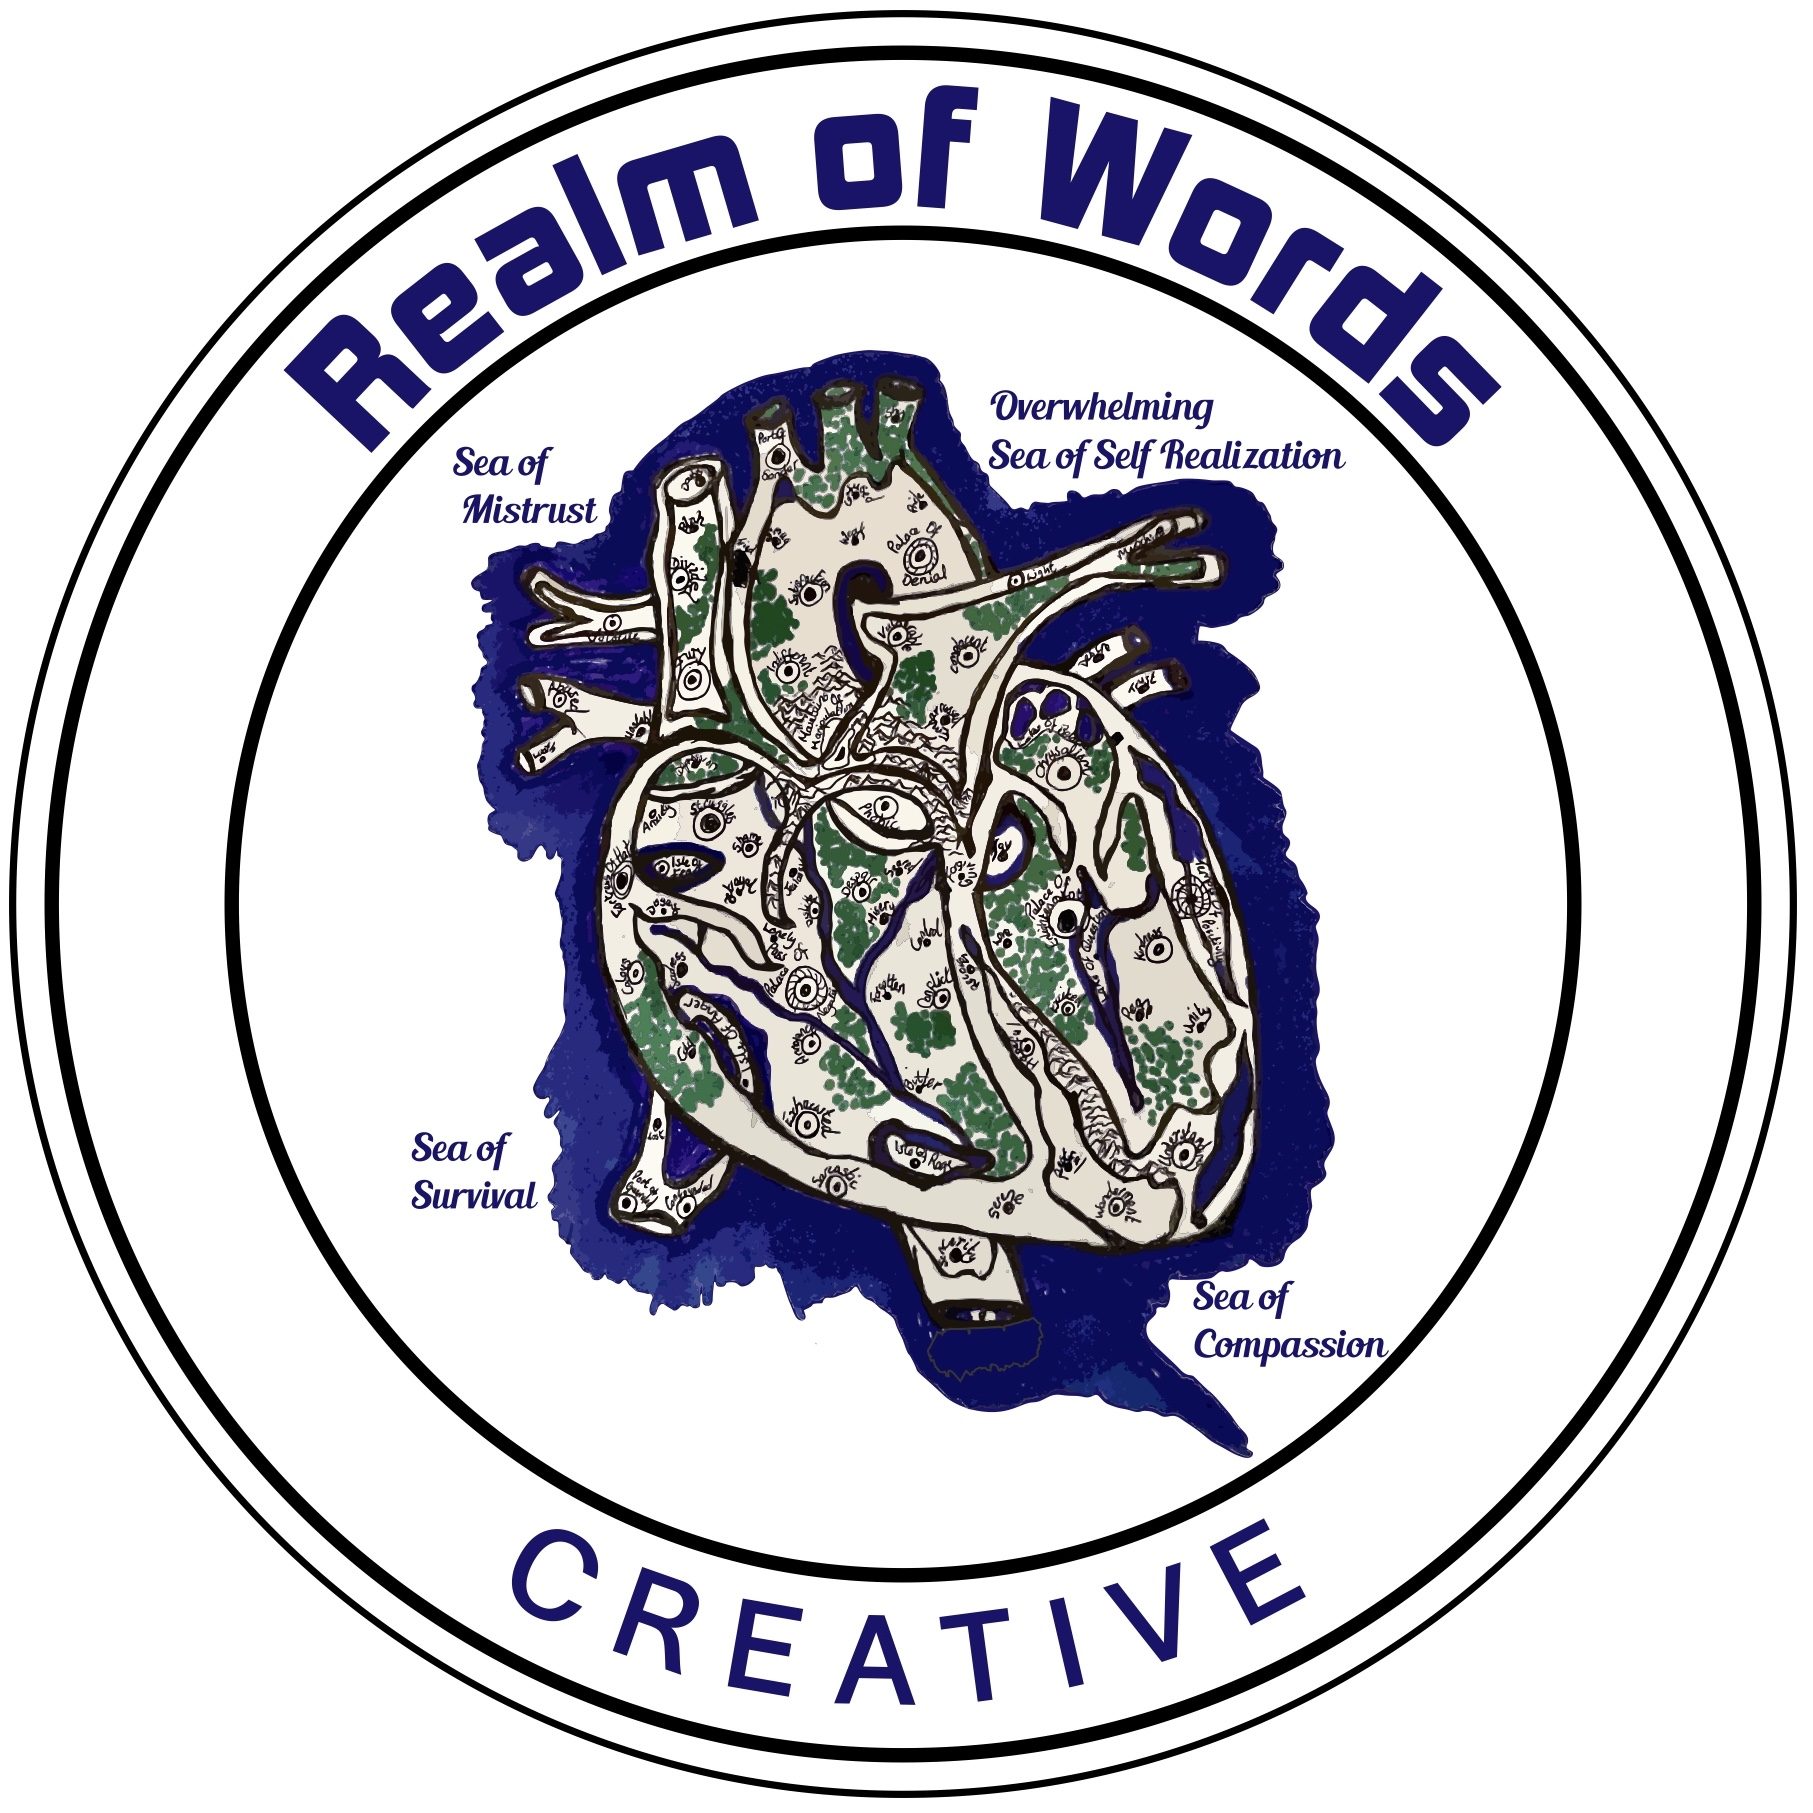 Realm of Words Creative